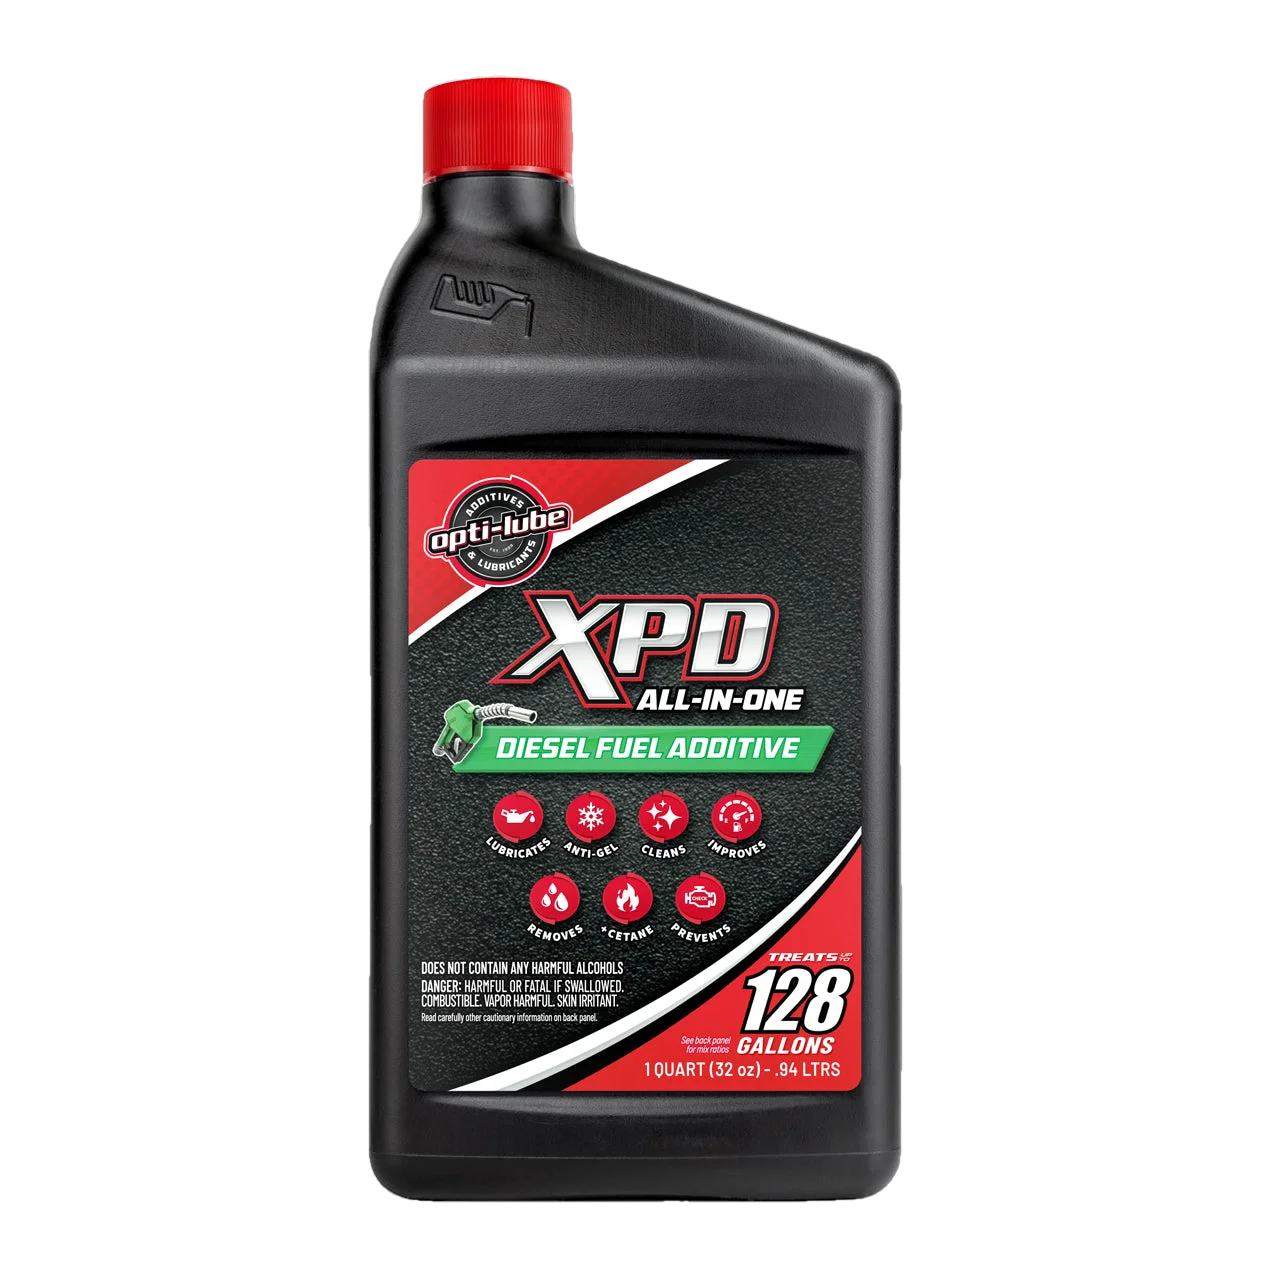 Opti-Lube XPD All-In-One Diesel Fuel Additive: 1 Quart, Treats up to 128 Gallons